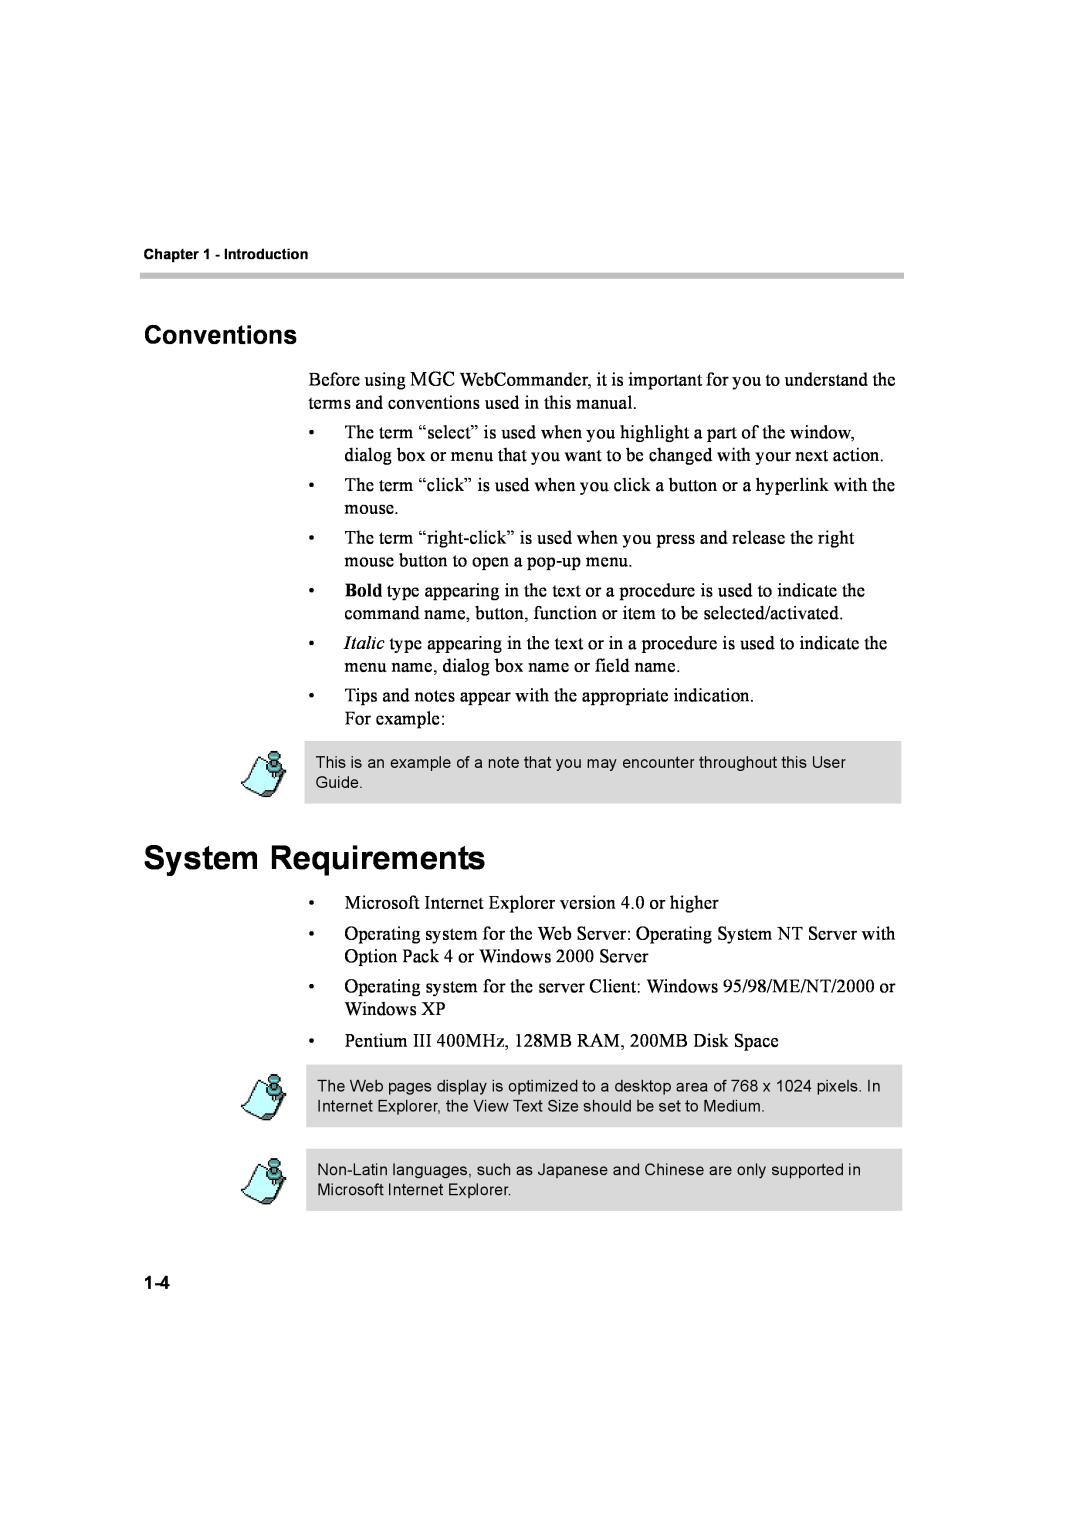 Polycom 8 manual System Requirements, Conventions 